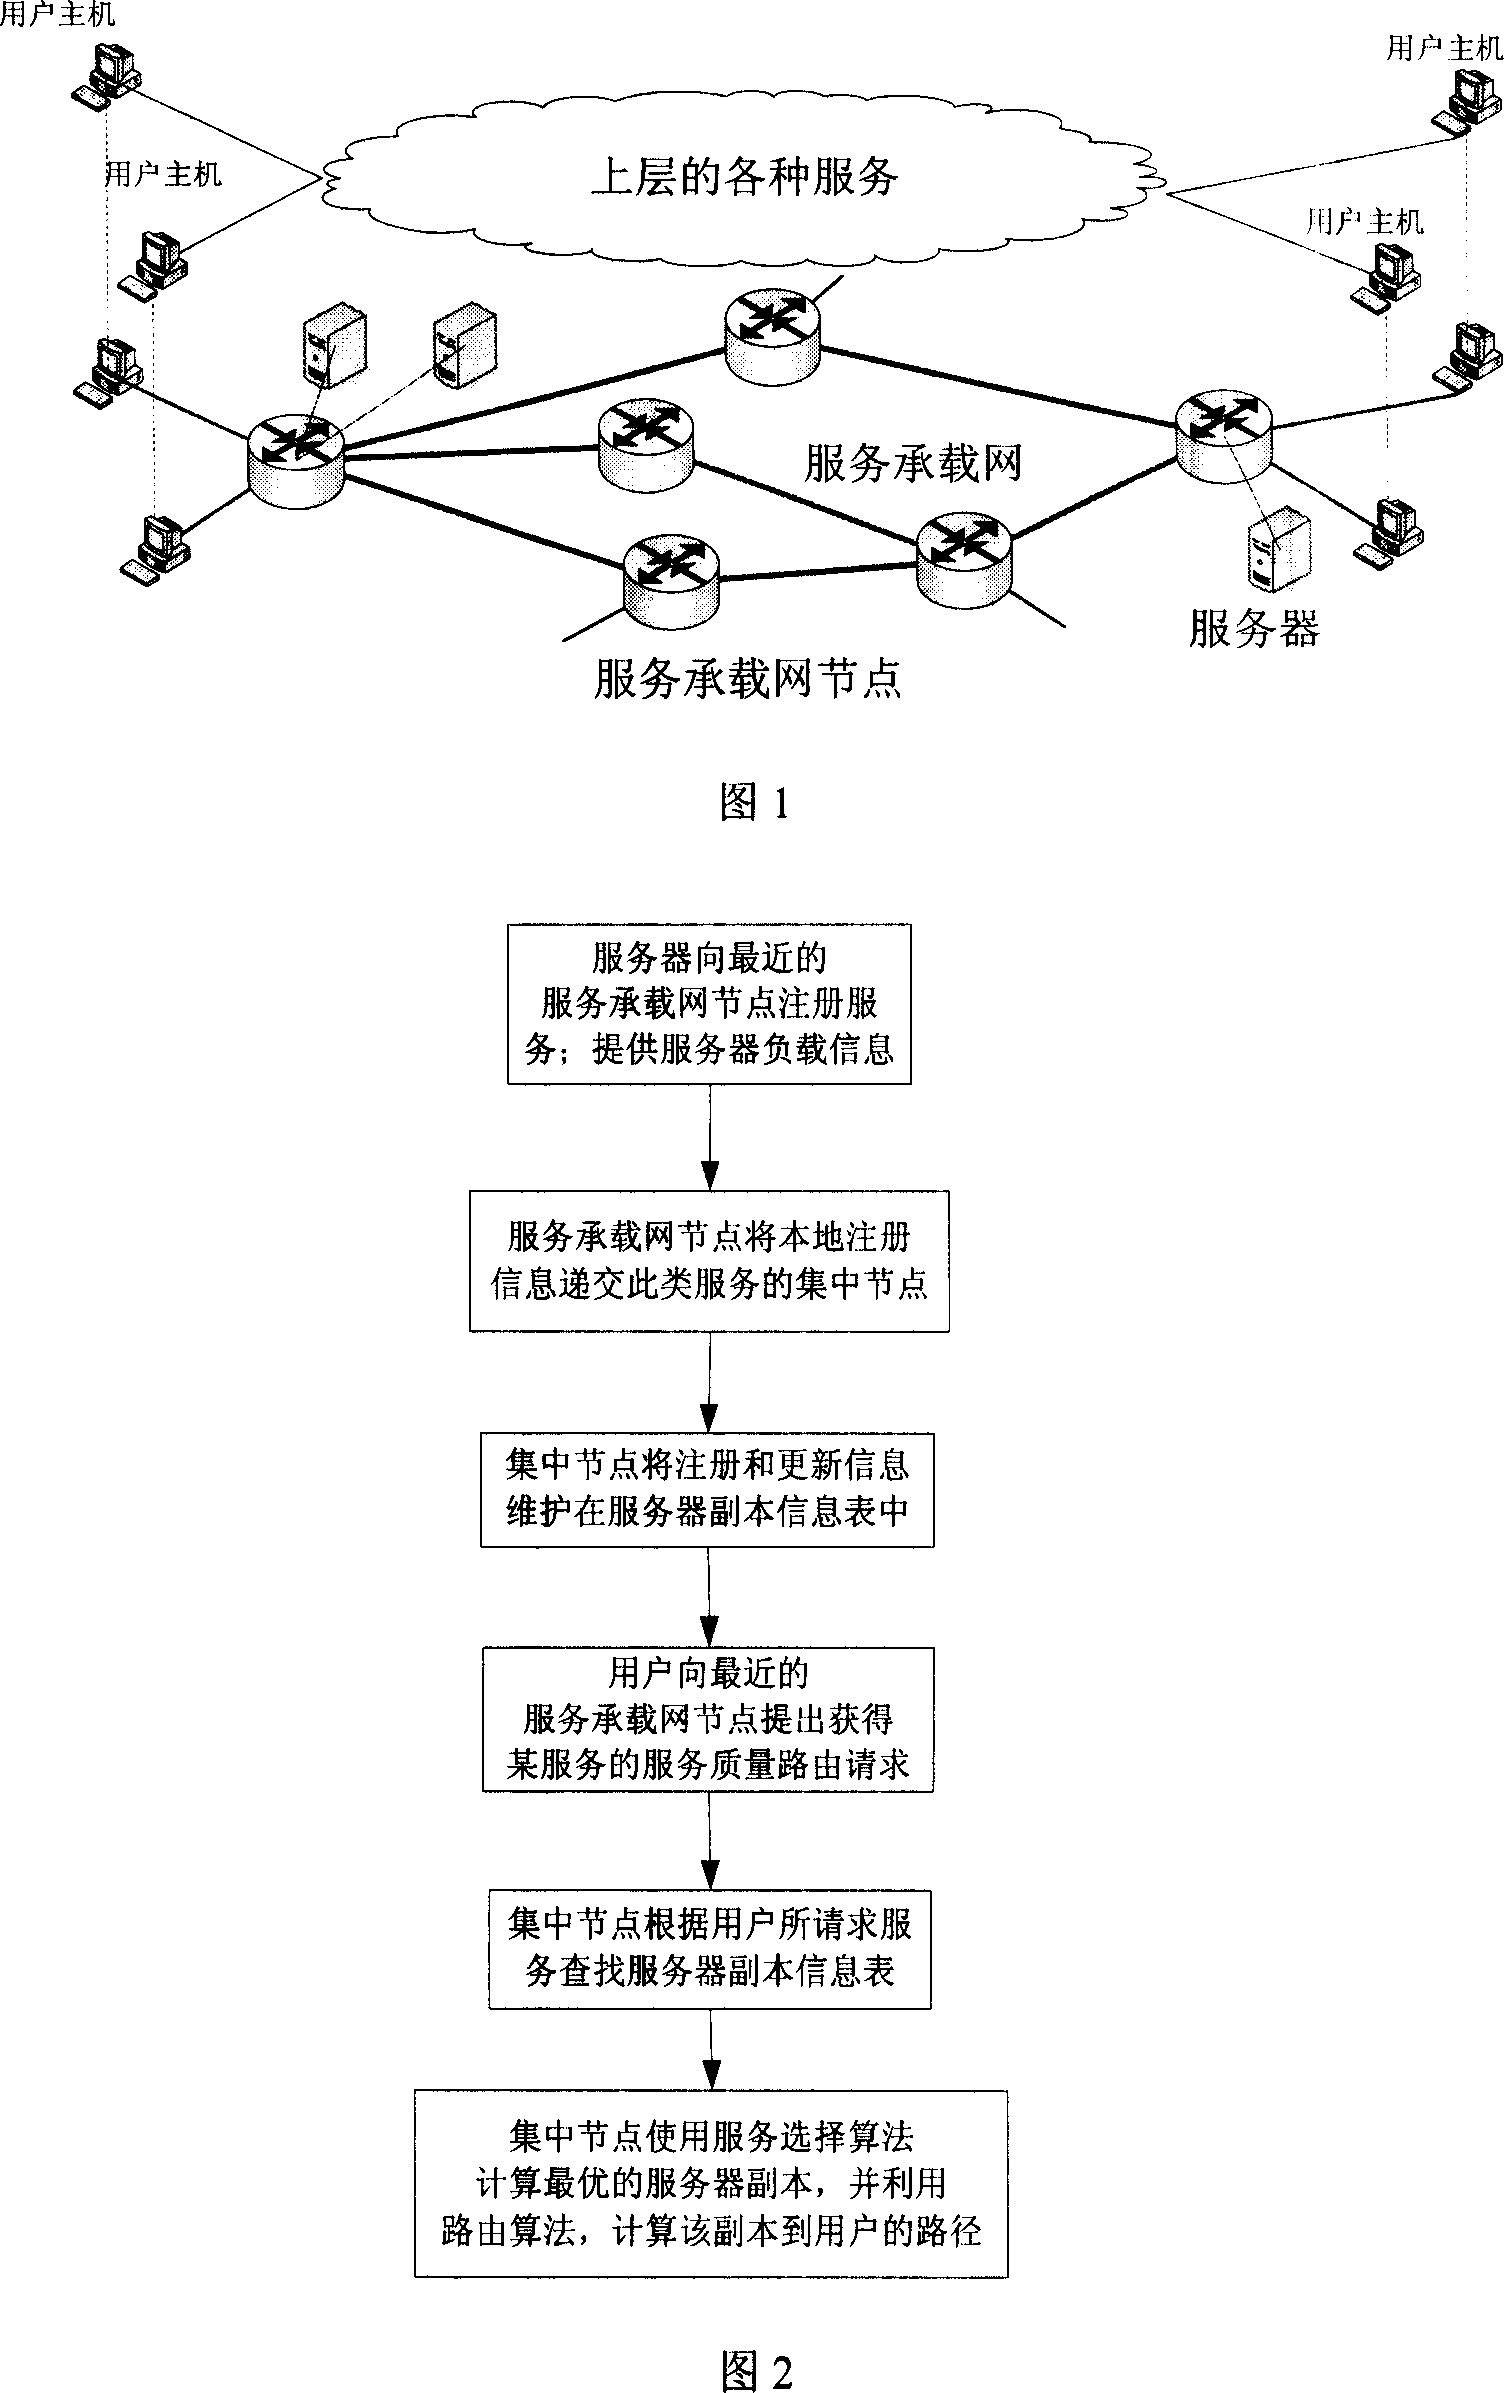 Method for integrating service location with service quality routing in service loading network